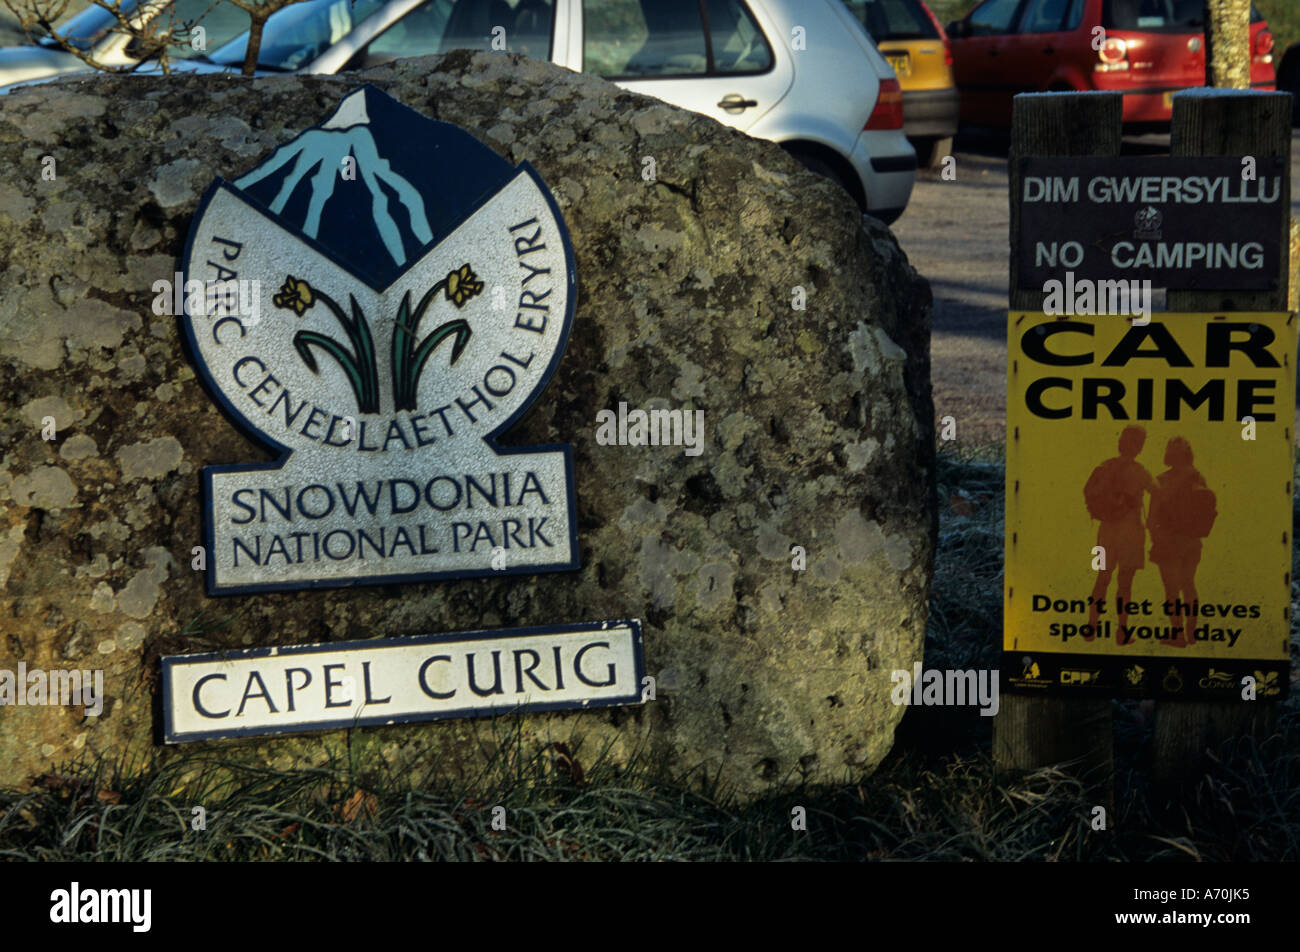 CAPEL CURIG CONWY NORTH WALES UK January Sign for Snowdonia National Park and a warning about car thieves operating in the area Stock Photo